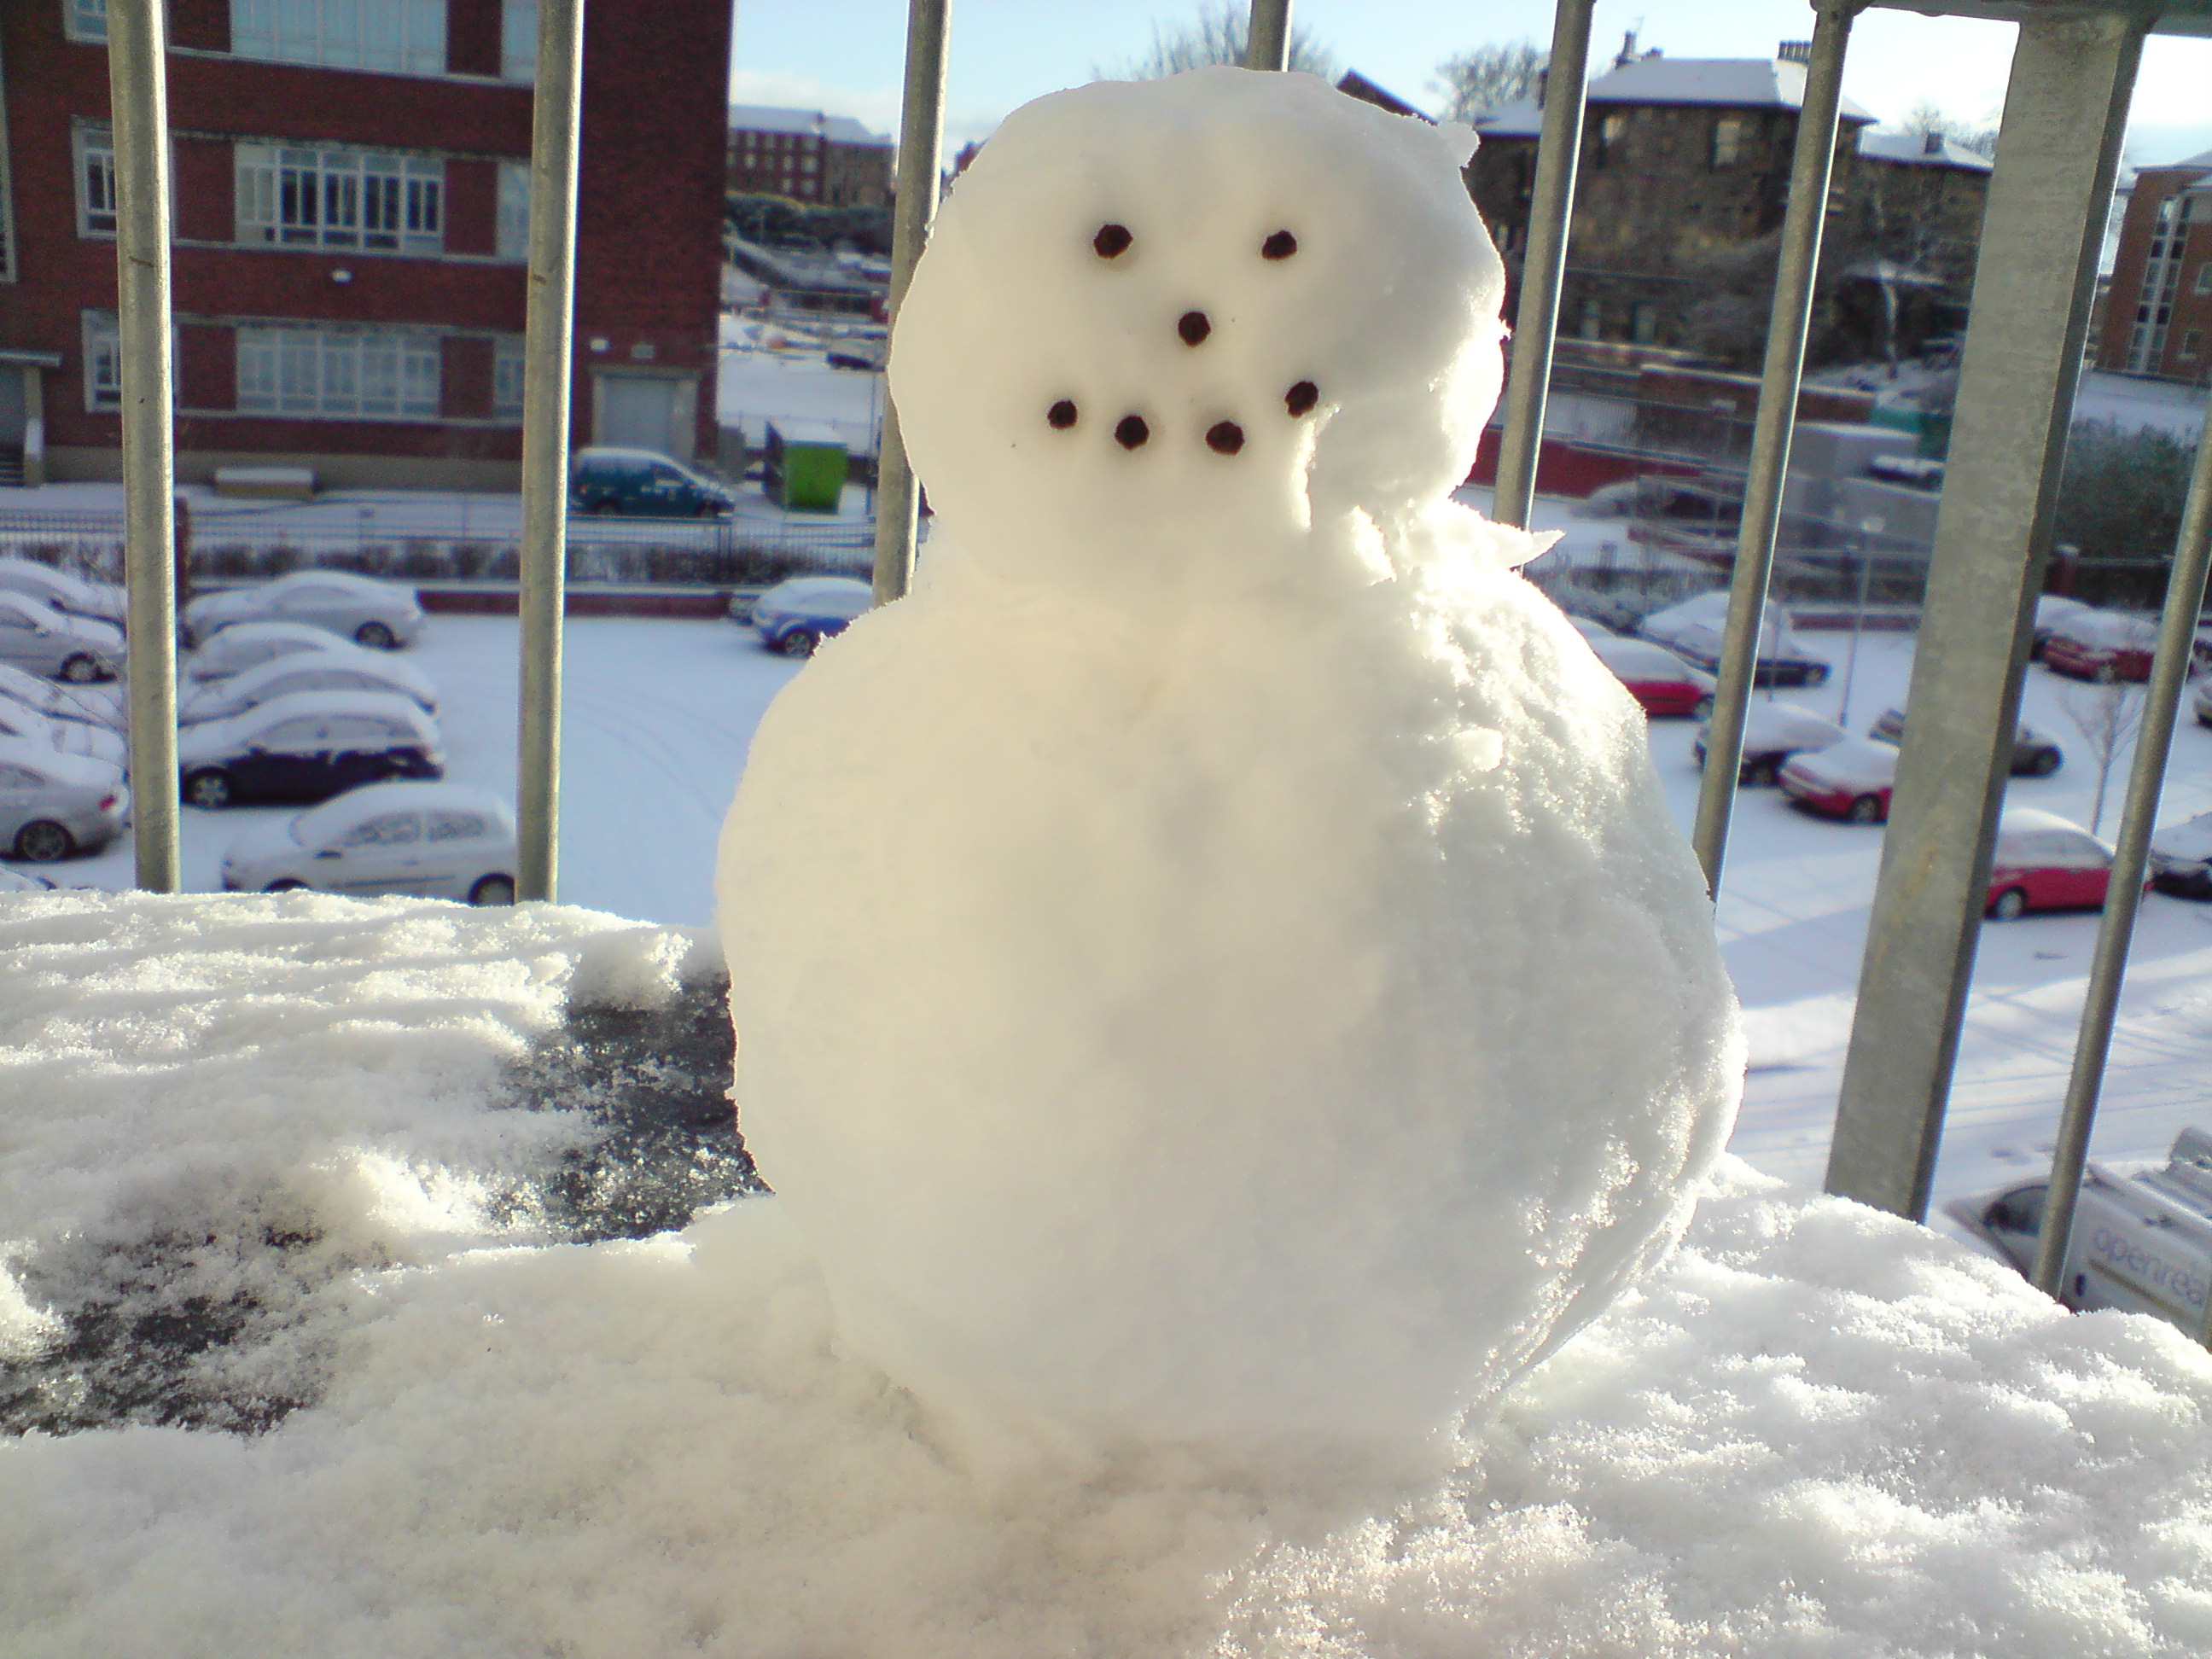 File:Snowman illustration.png - Wikimedia Commons